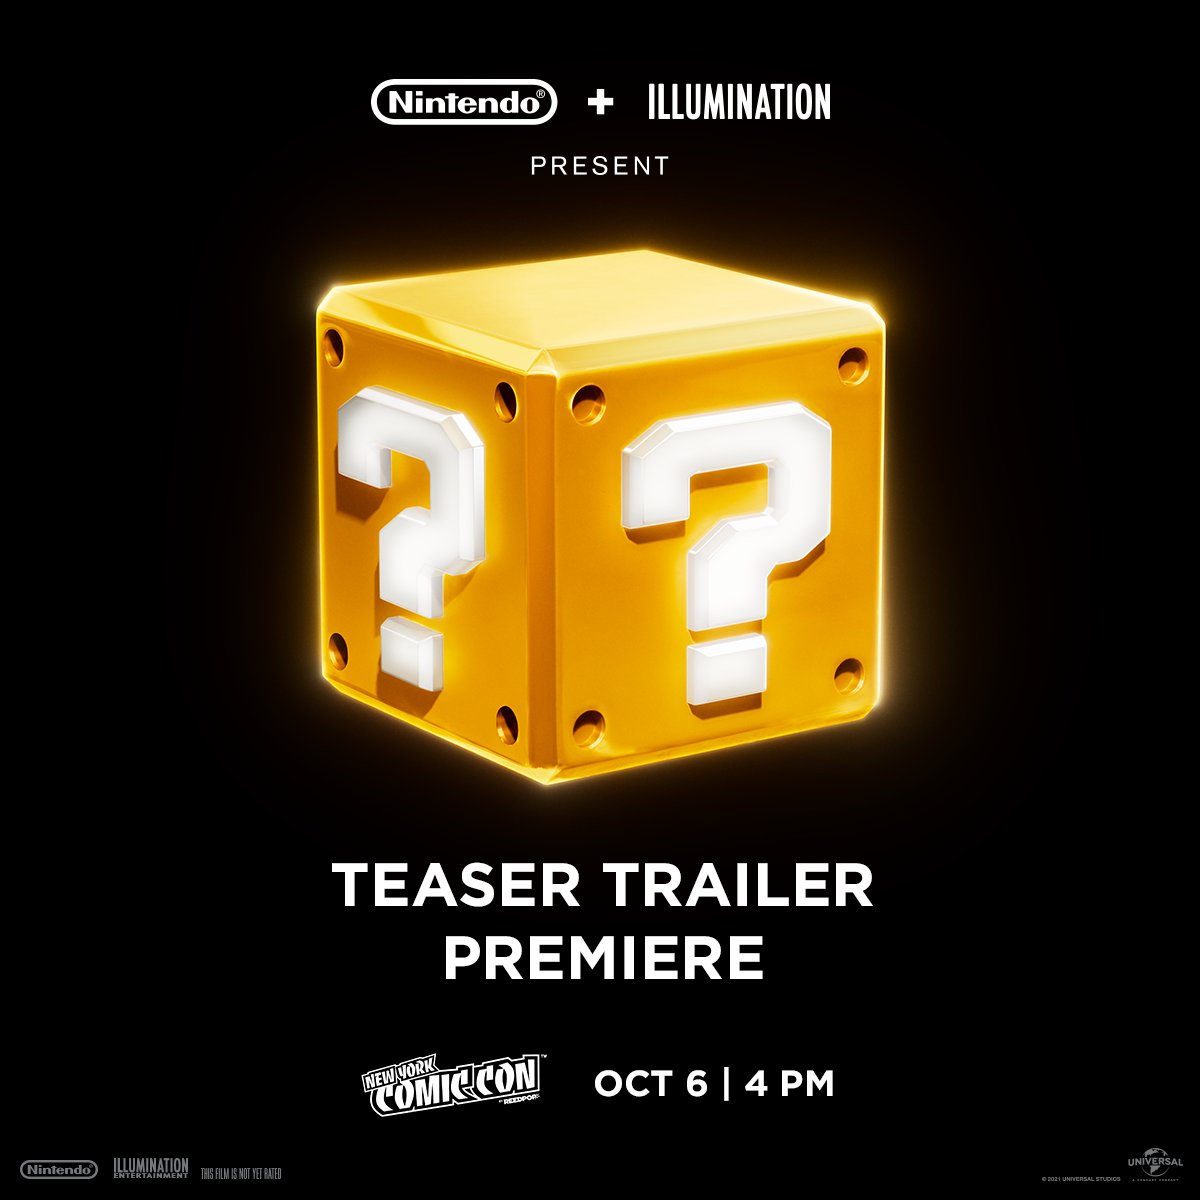 Join us October 6th at 4pm ET for the teaser trailer premiere of Nintendo & Illumination’s upcoming Super Mario Bros. film, releasing April 7, 2023.